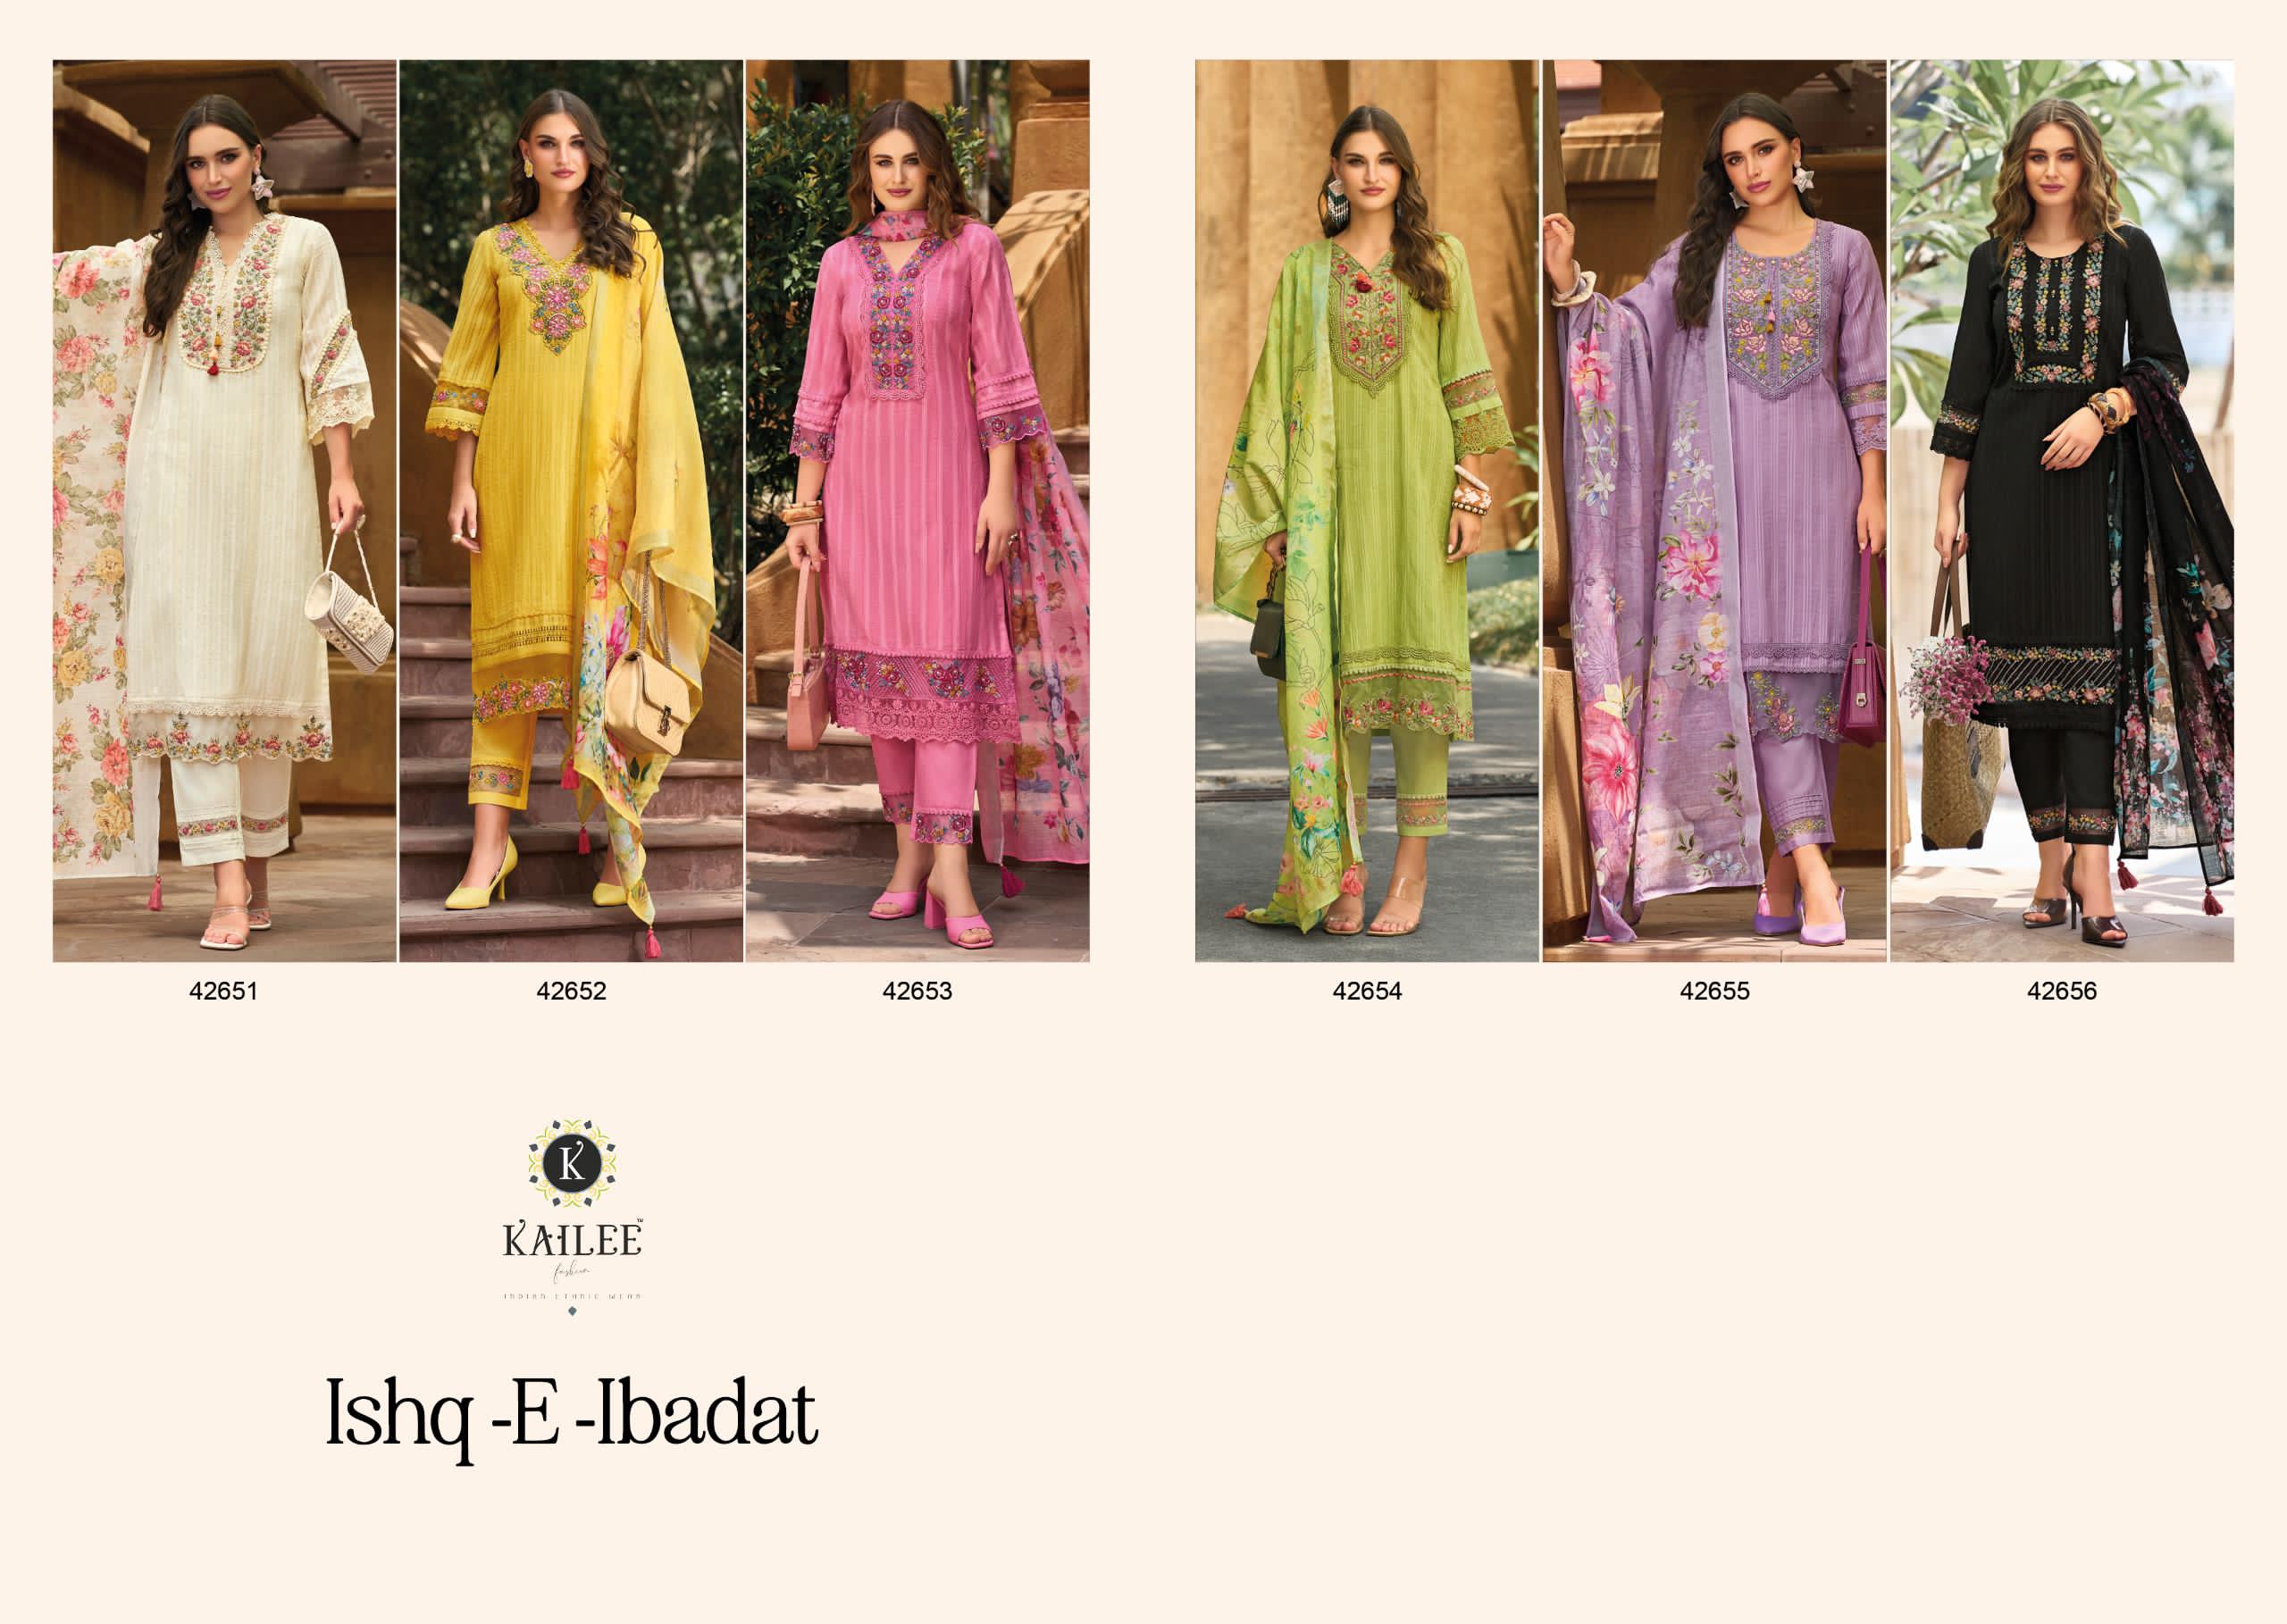 Kailee Ishq E Ibadat collection 7